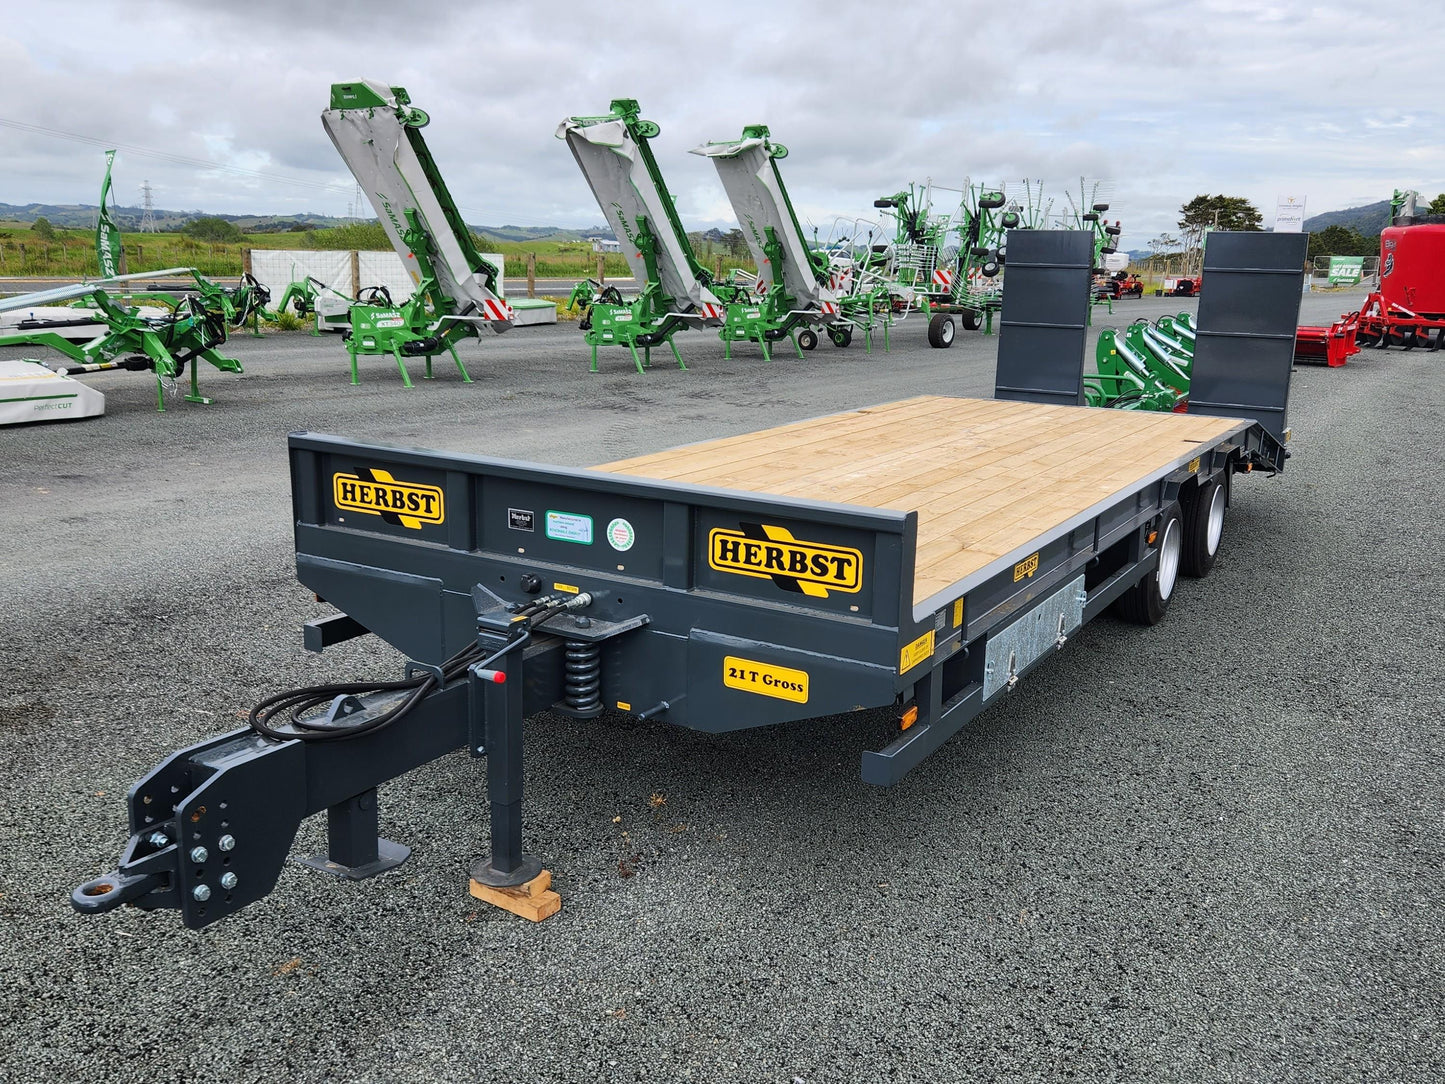 Herbst Low Loader Trailer for Tractors 21T